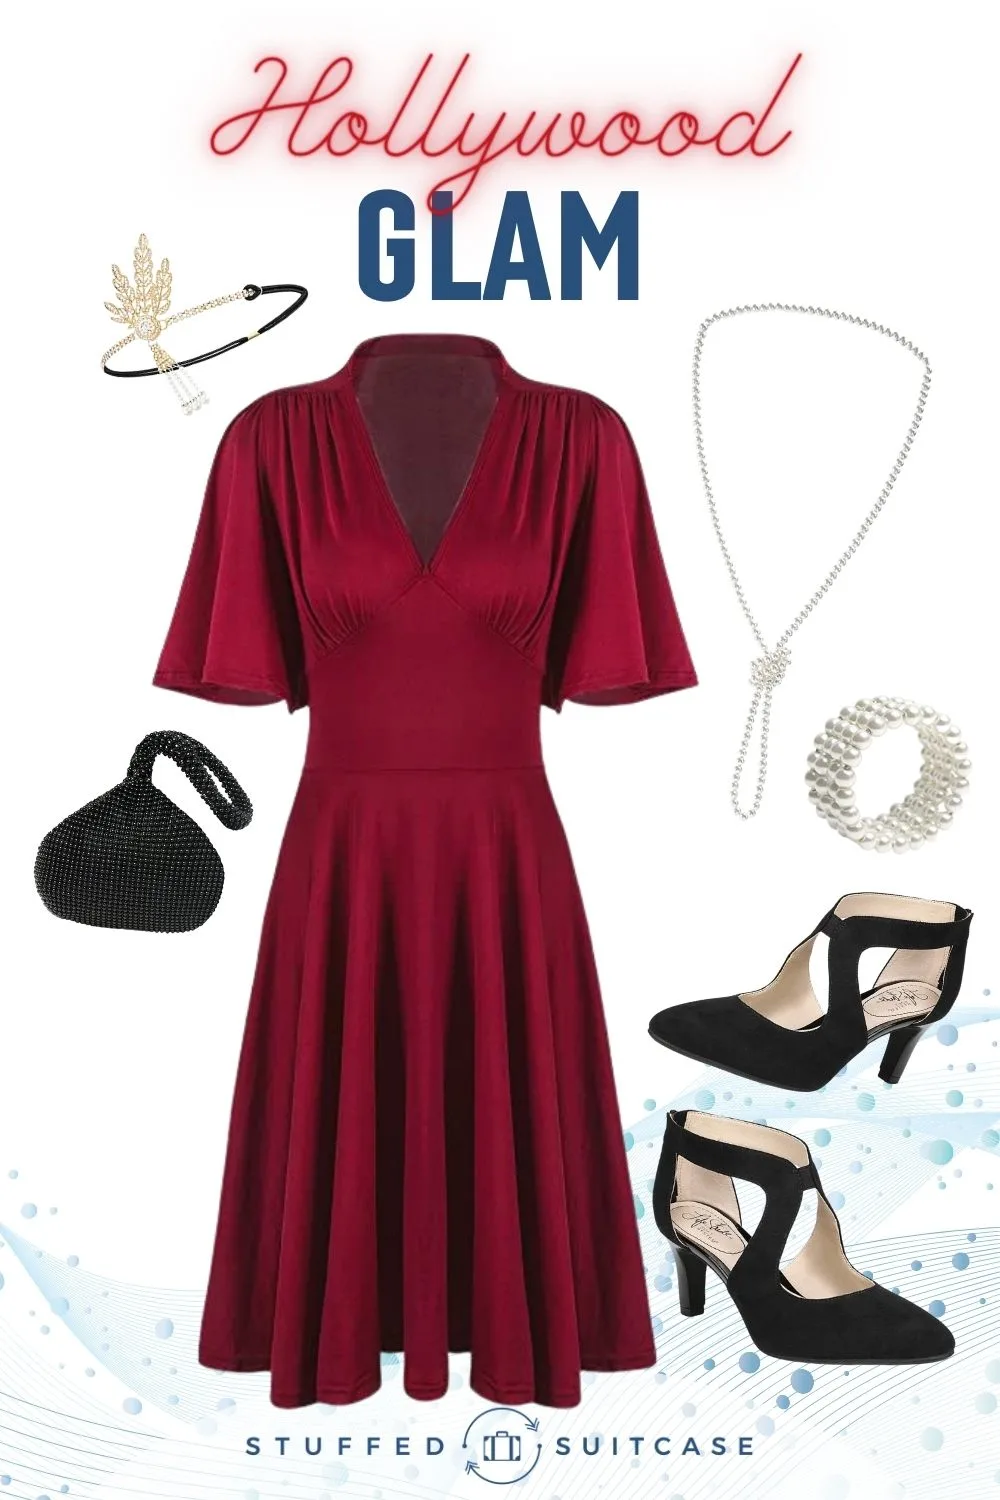 hollywood glam outfit collage red dress black shoes and pearl accessories